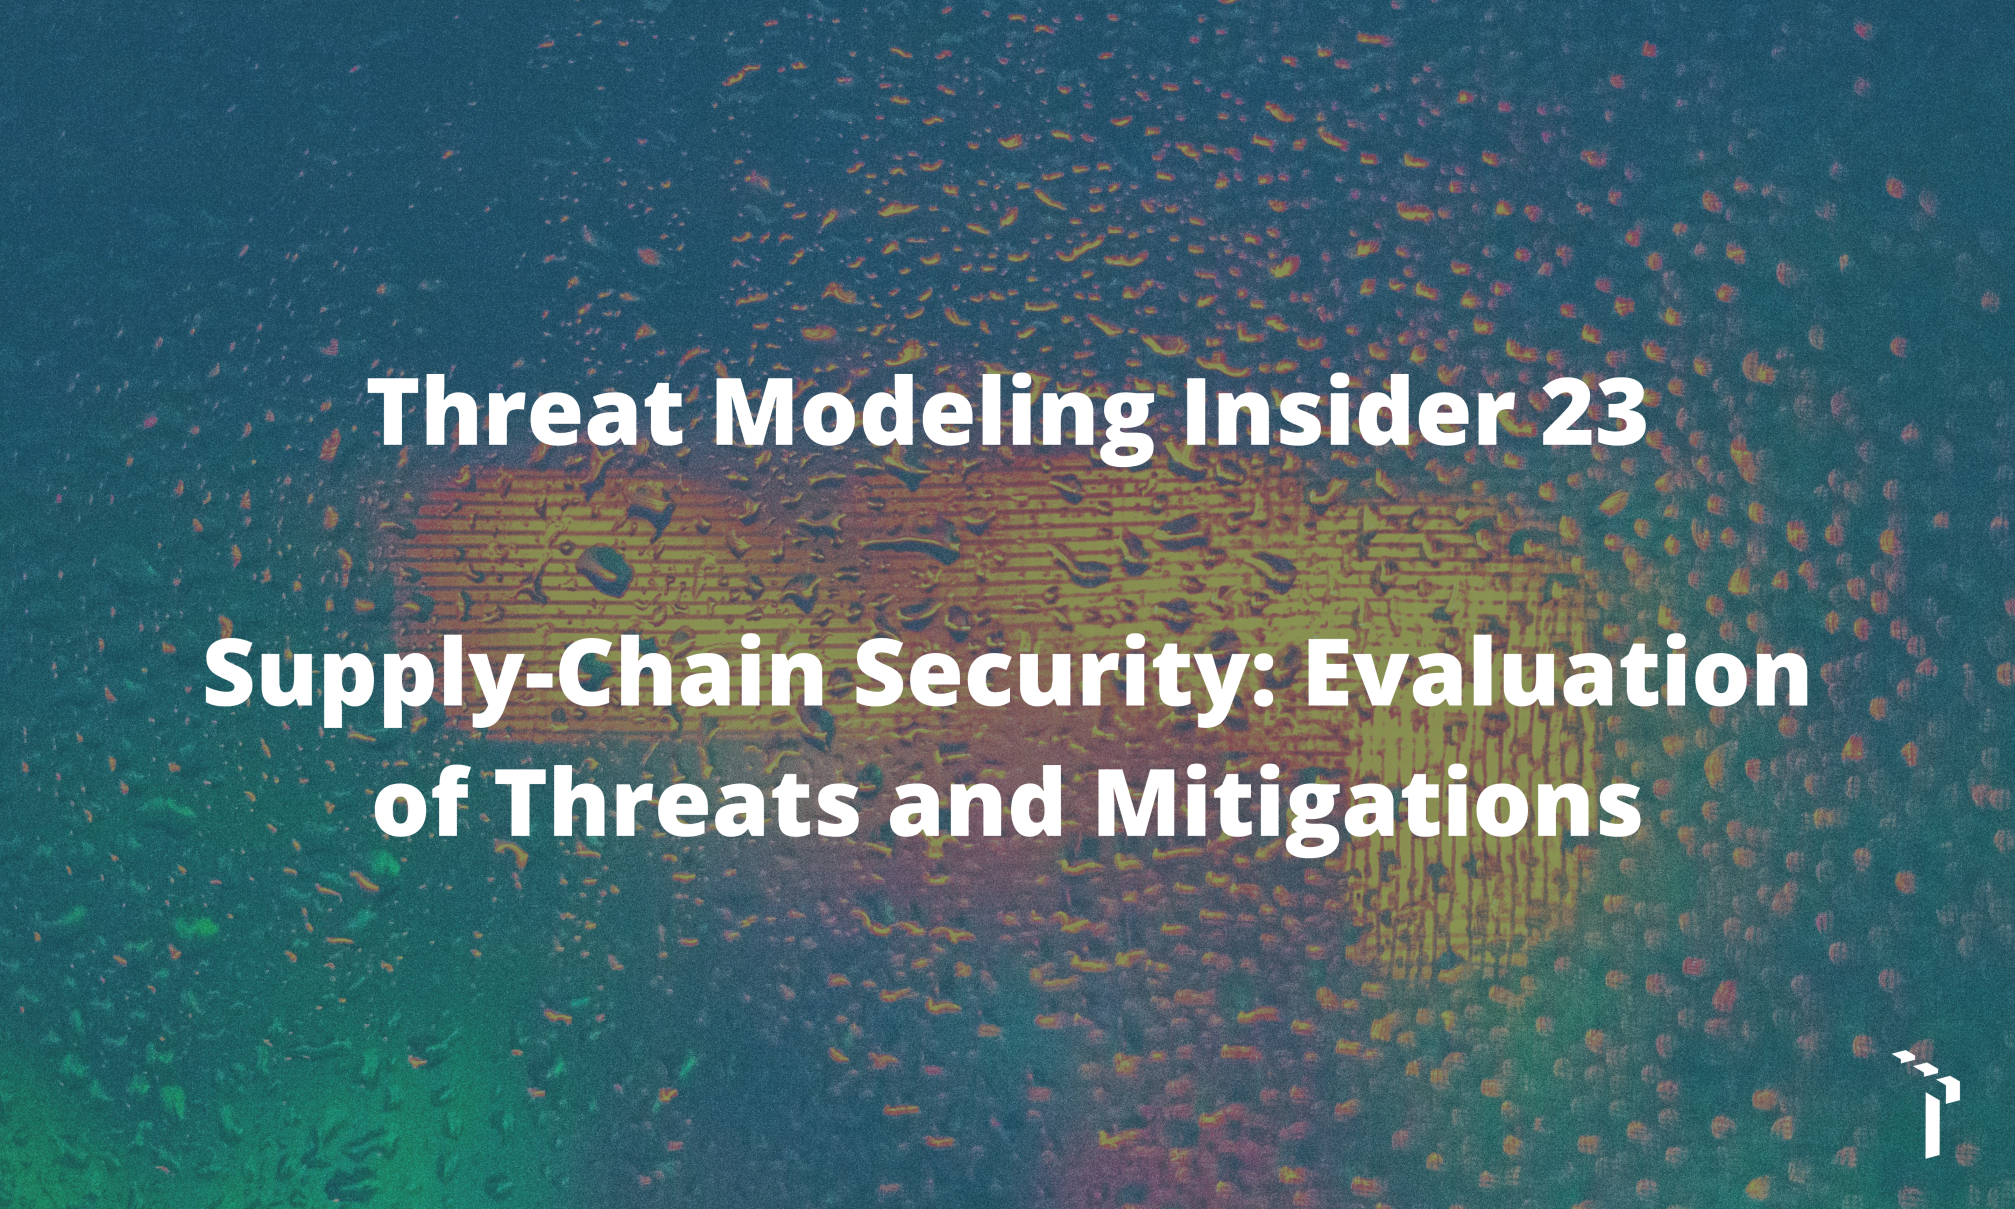 TMI newsletter 23 – Supply-Chain Security: Evaluation of Threats and Mitigations